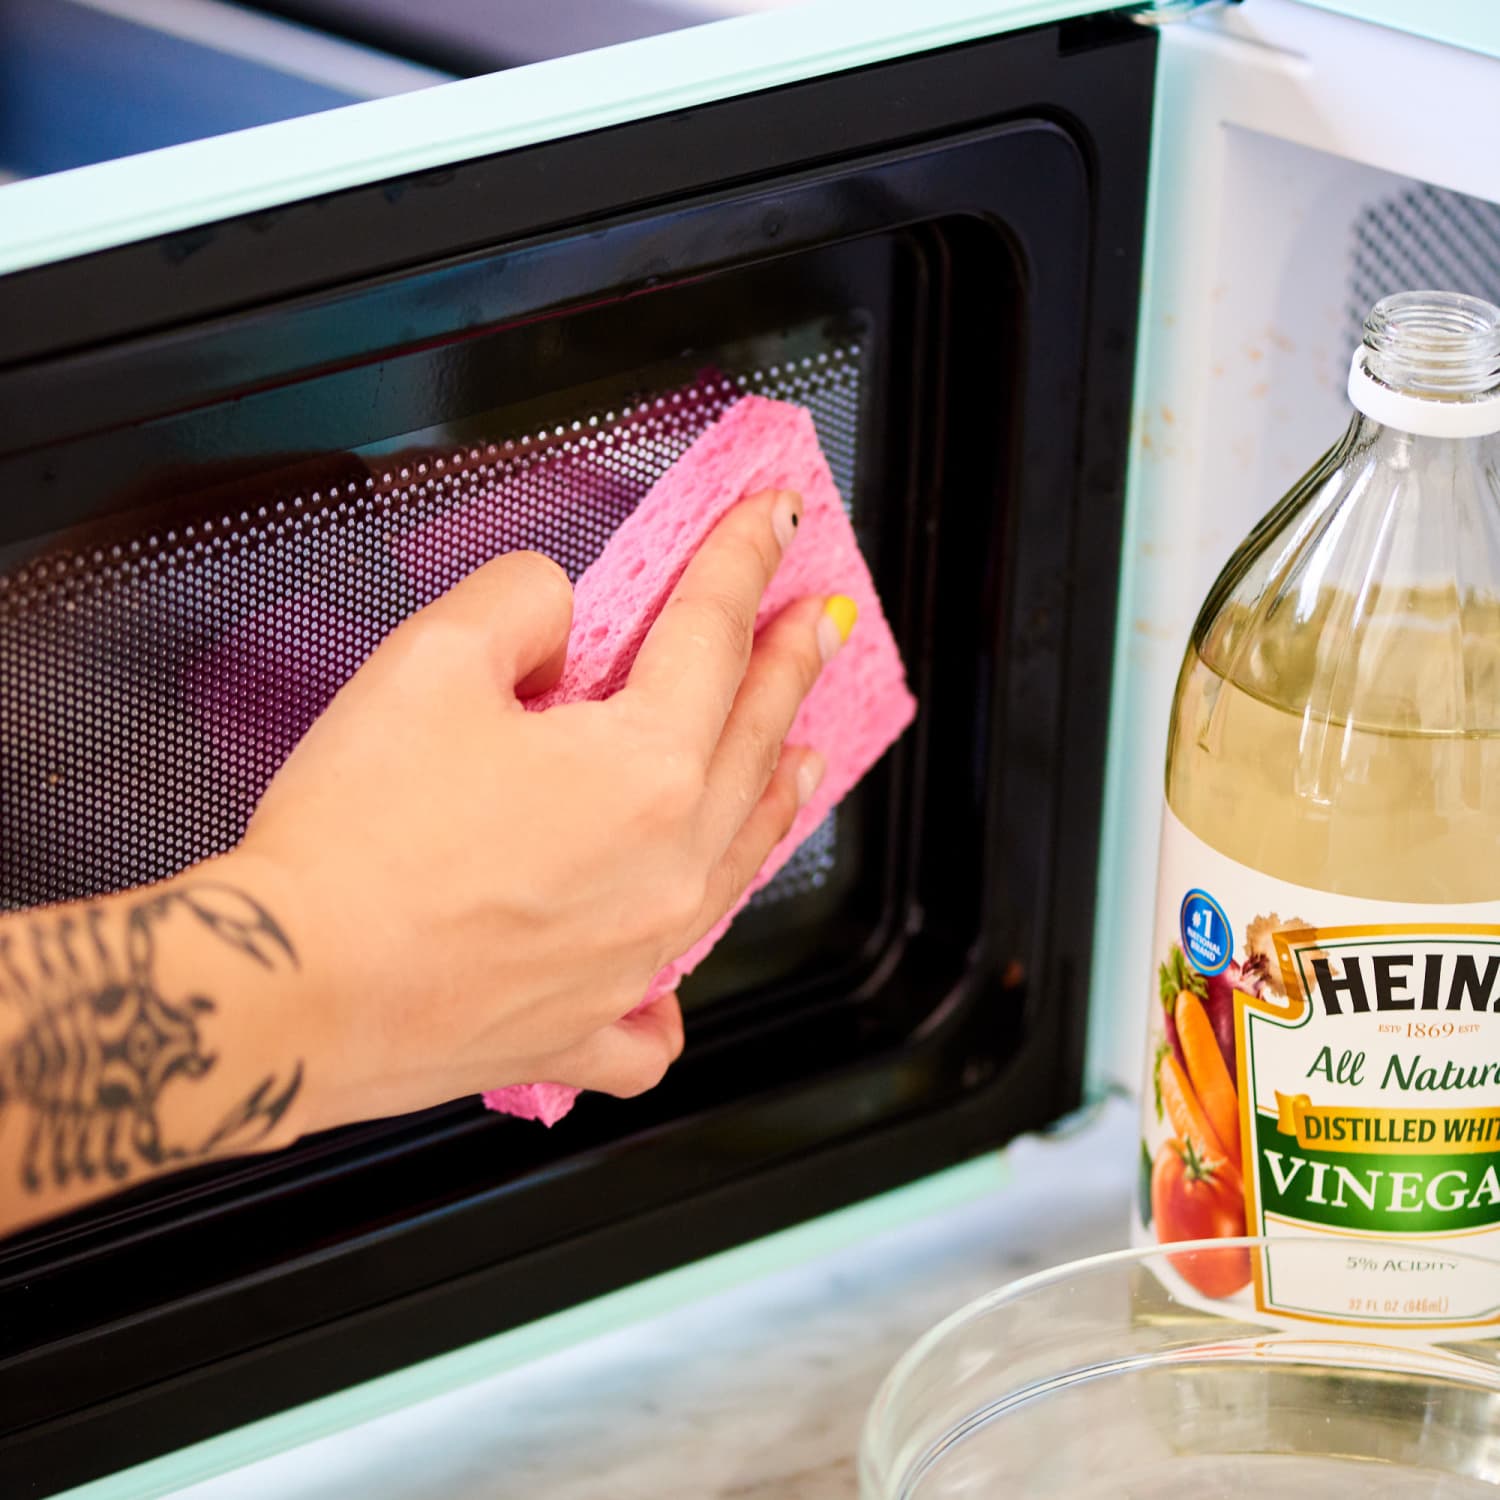 Benefits of Steam Cleaning Your Microwave